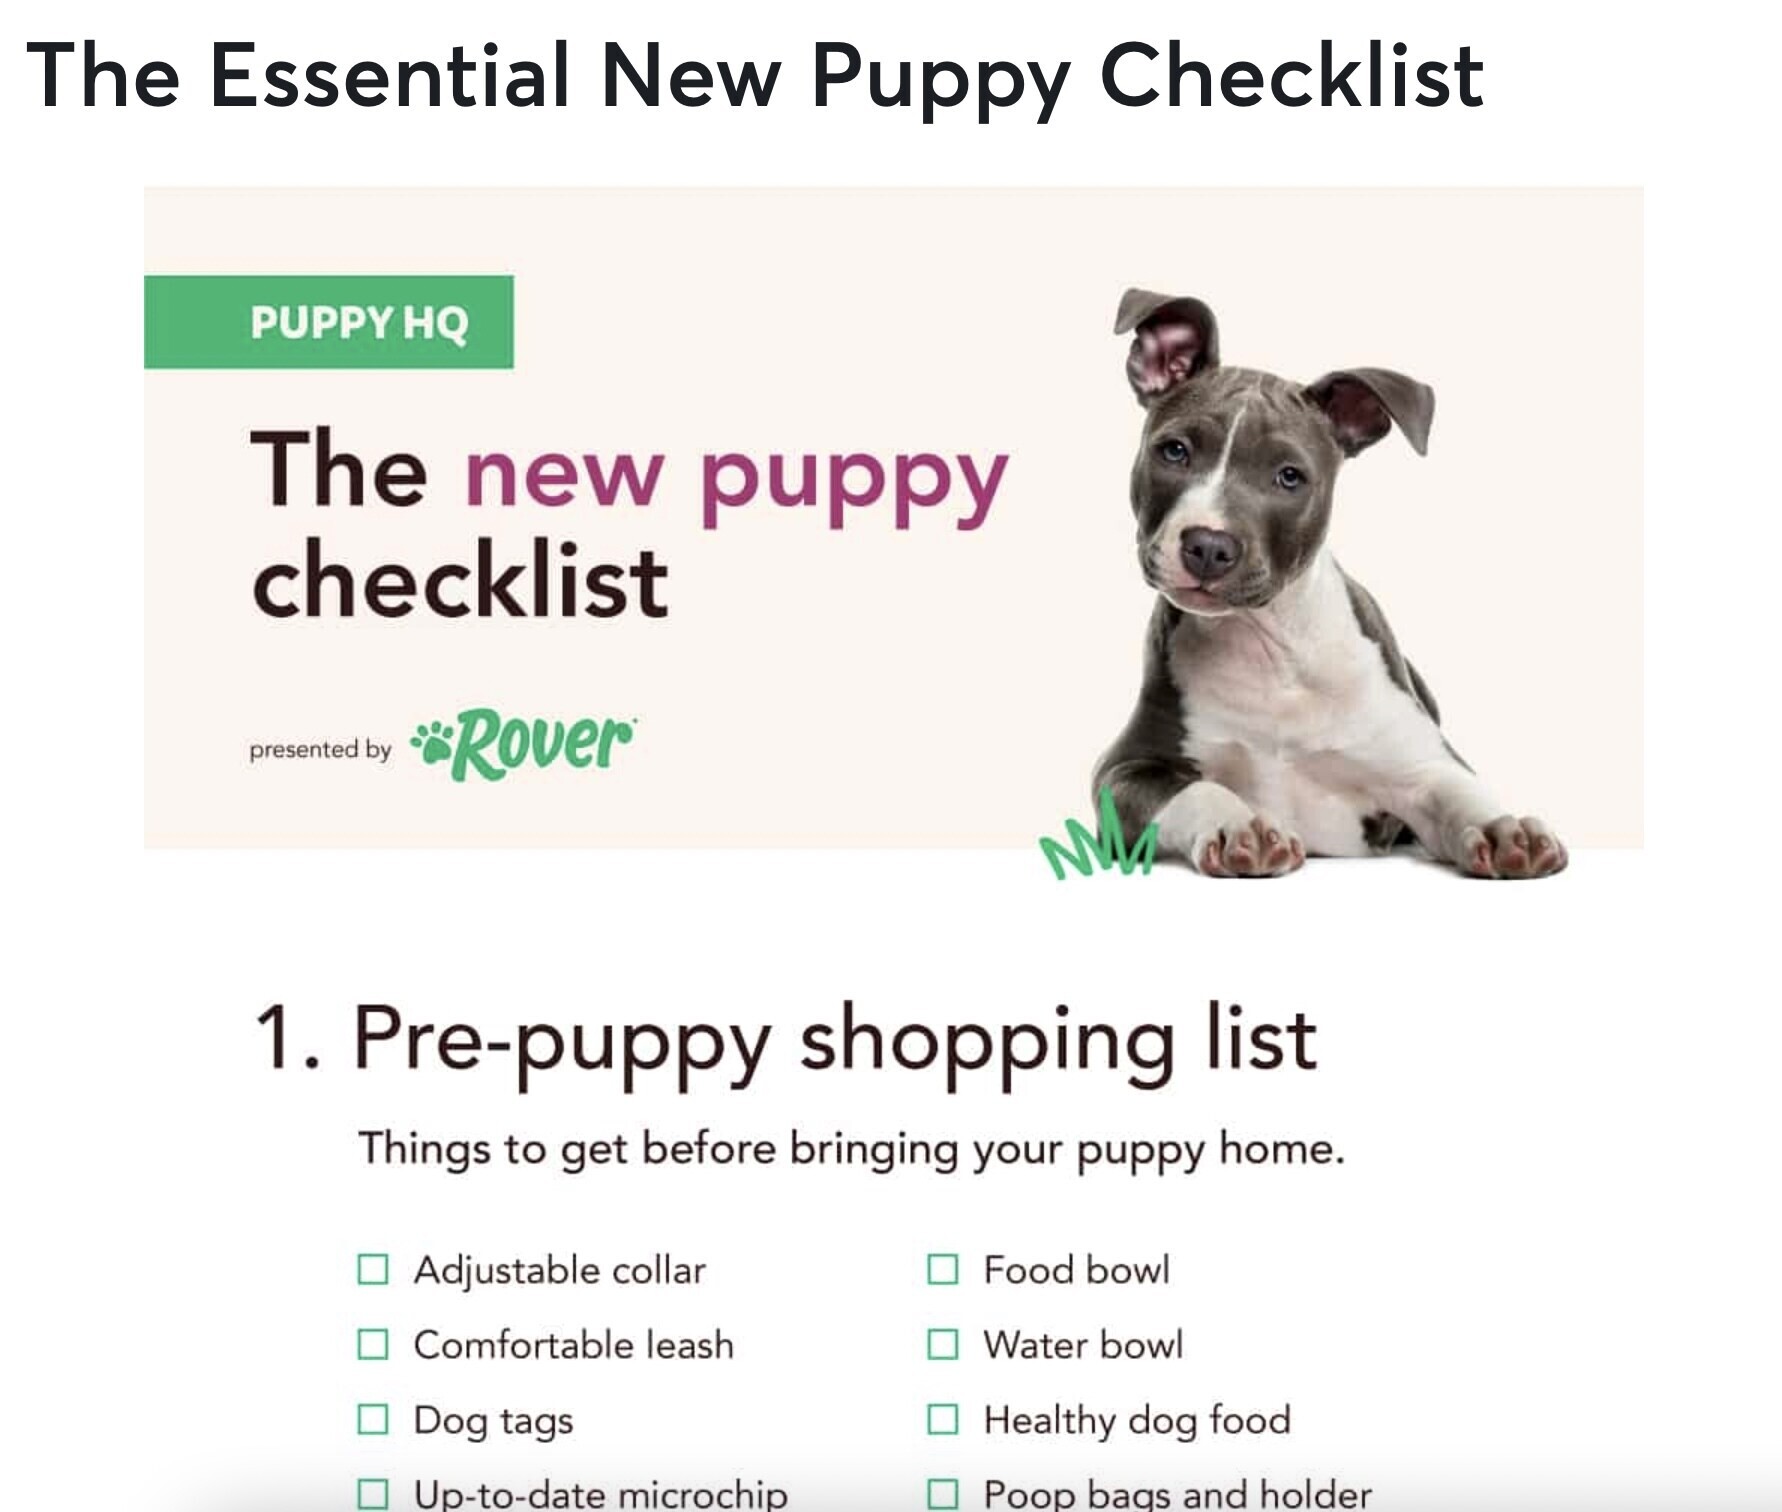 Blog post graphic about "The Essential new Puppy Checklist"